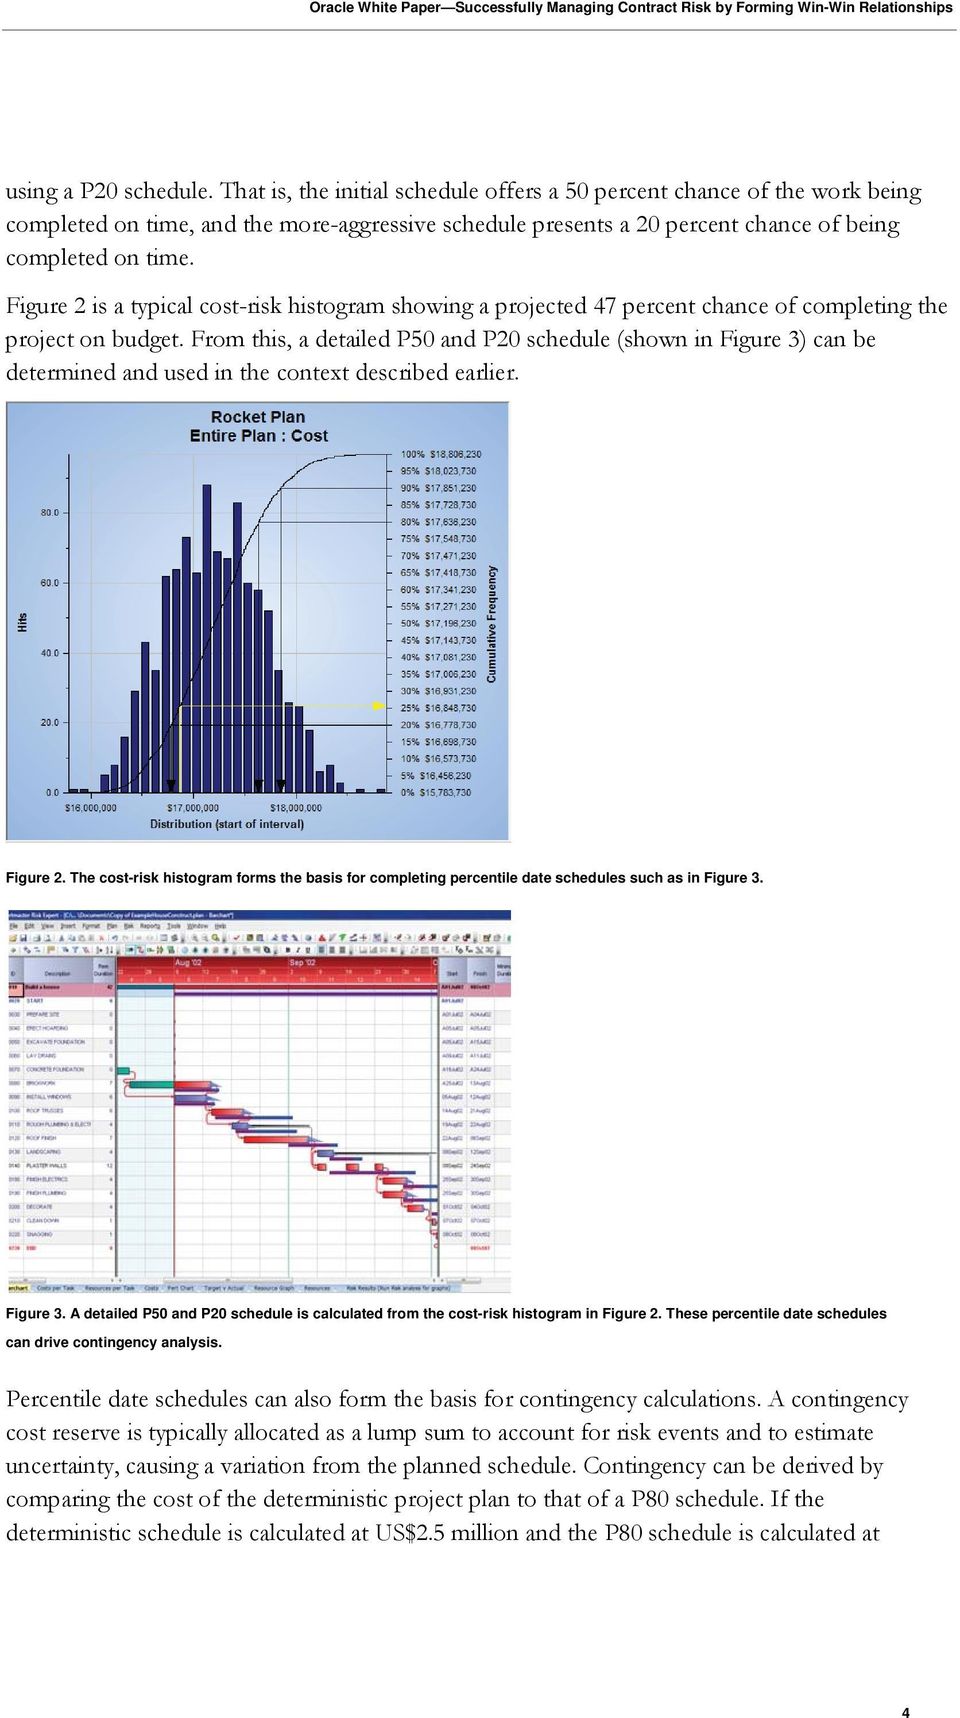 Figure 2 is a typical cost-risk histogram showing a projected 47 percent chance of completing the project on budget.